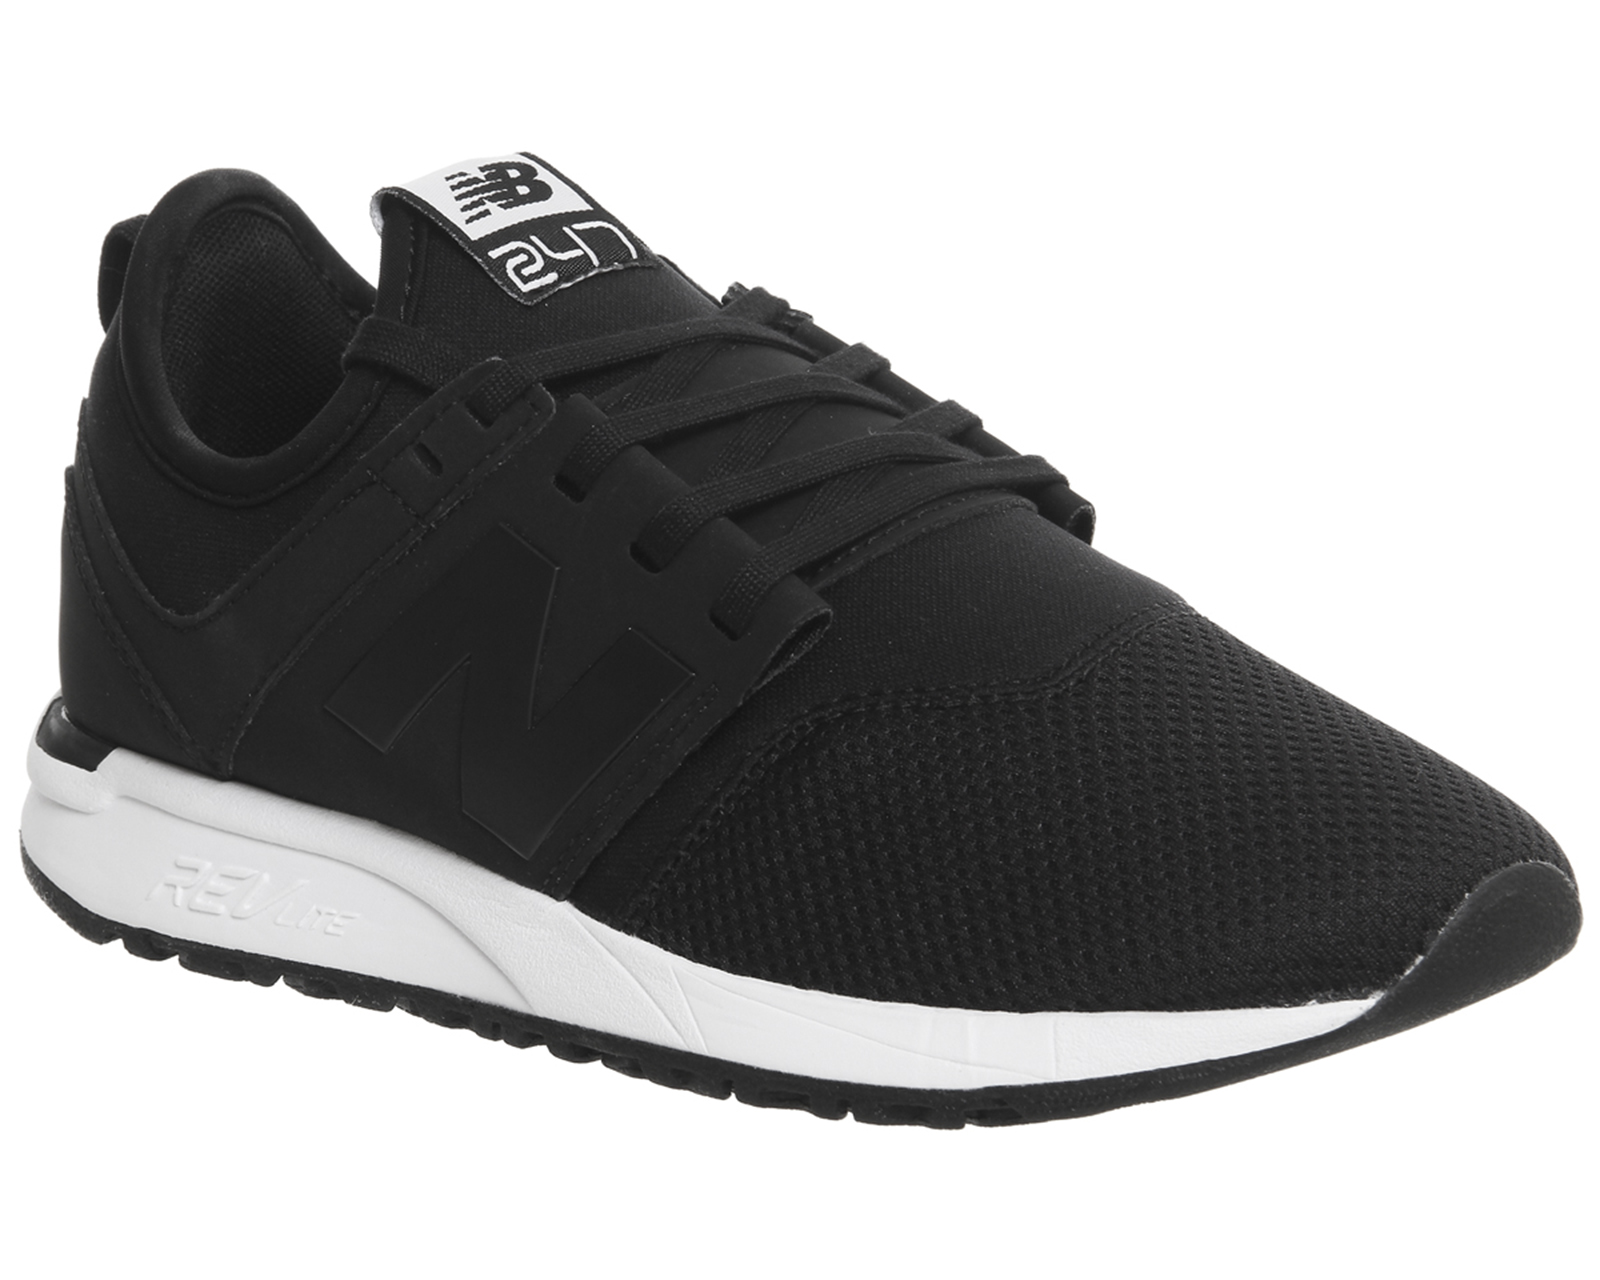 black and white new balance trainers